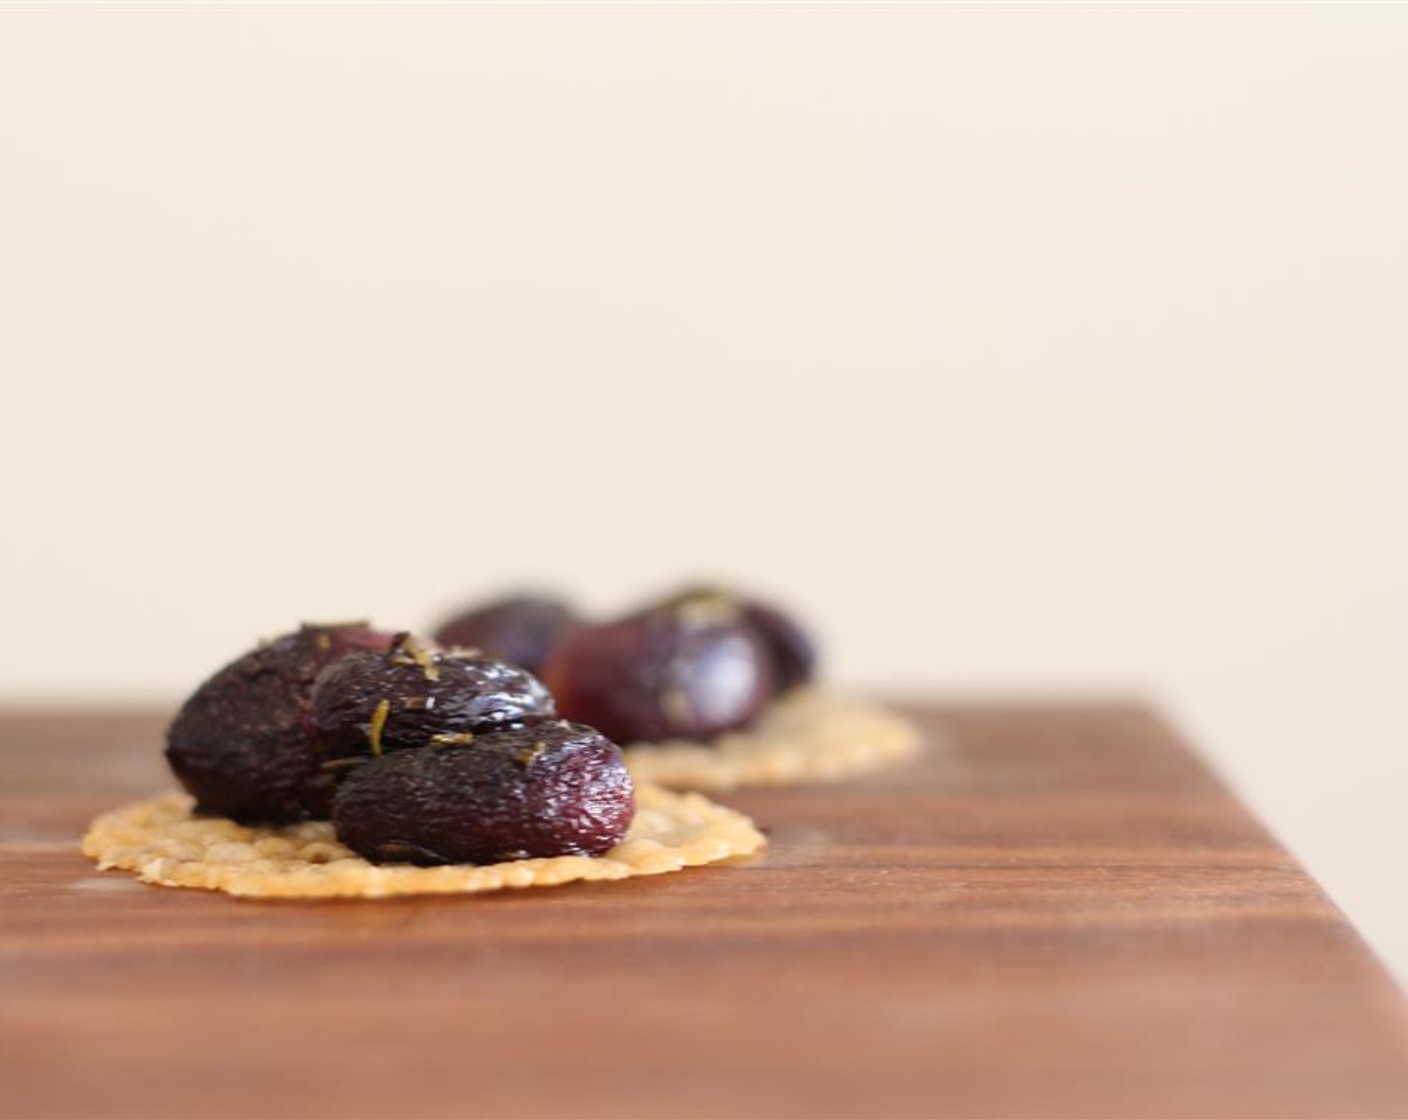 step 8 Arrange 2-3 cooled grapes on each crisp and drizzle with a bit of Honey (1/2 Tbsp). Serve and enjoy!